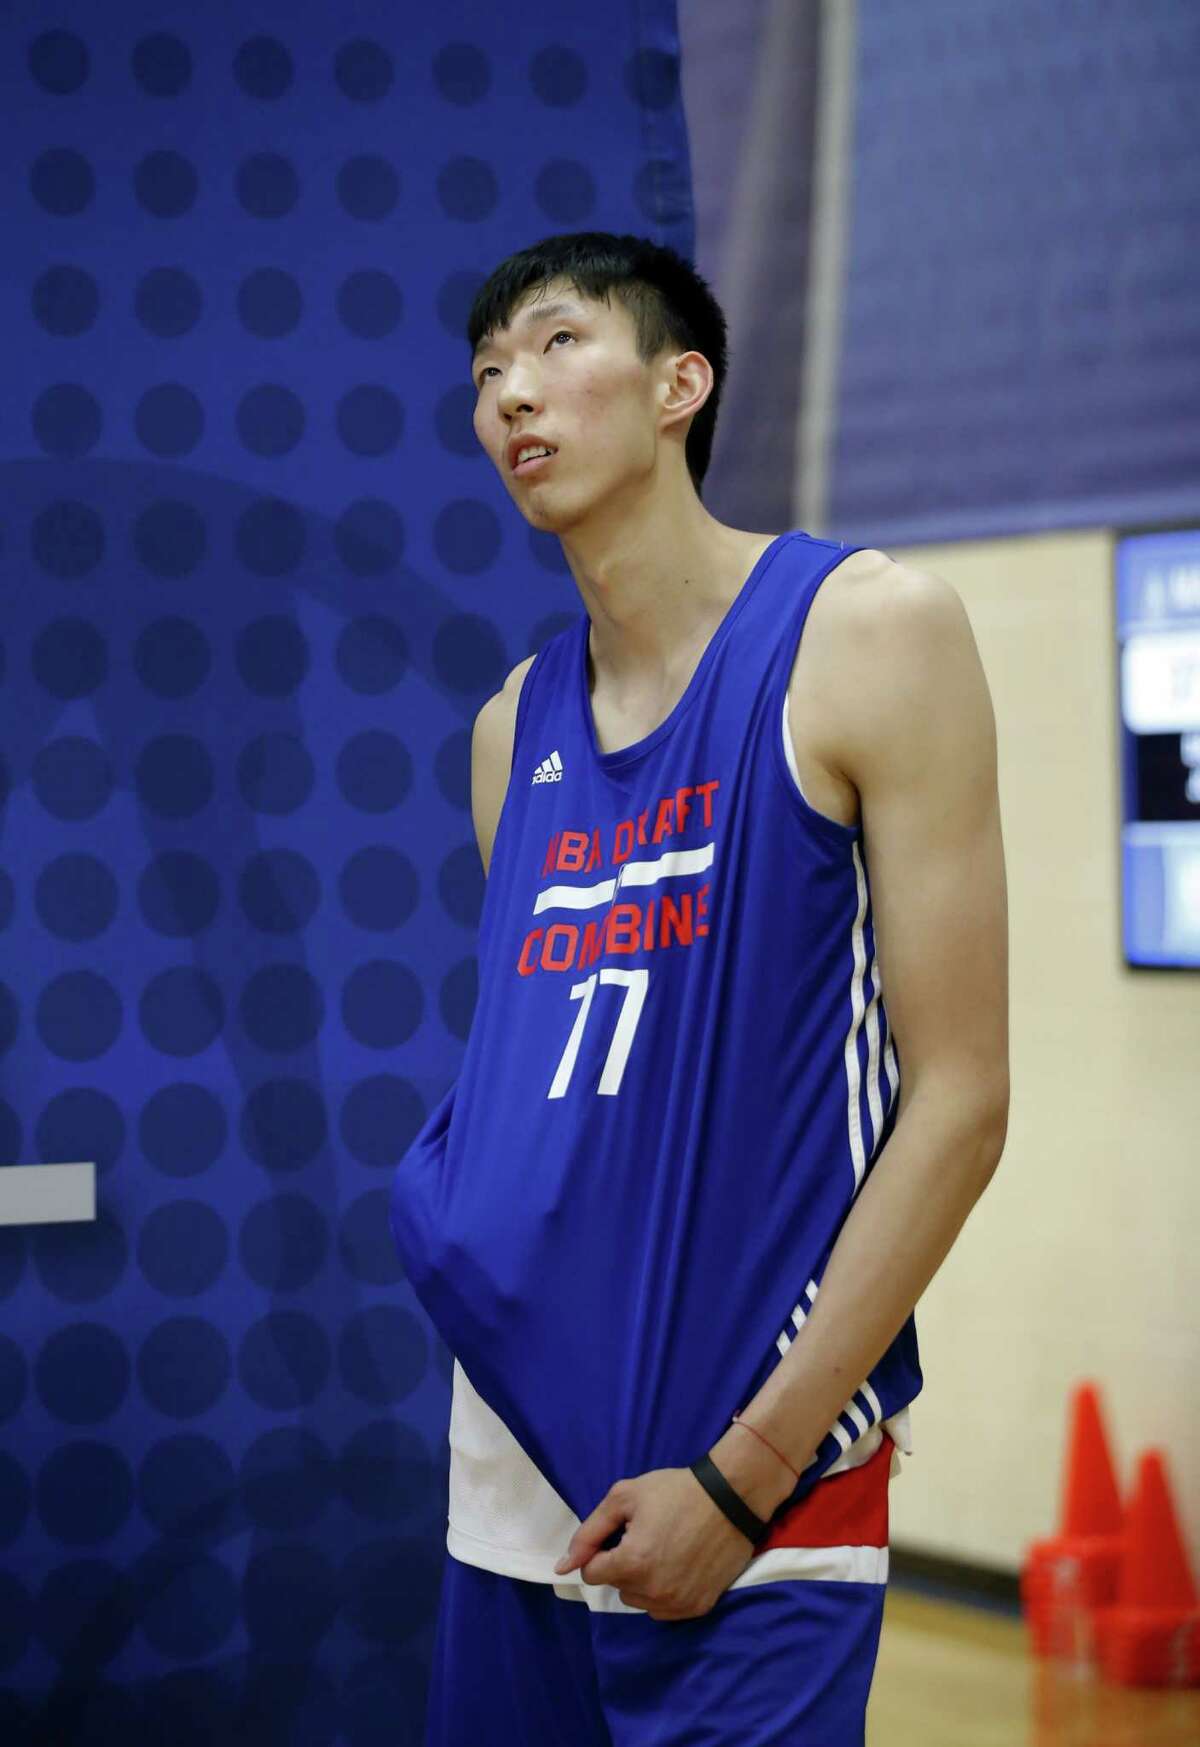 Zhou Qi, from China, participates in the NBA draft basketball combine Thursday, May 12, 2016, in Chicago. (AP Photo/Charles Rex Arbogast)